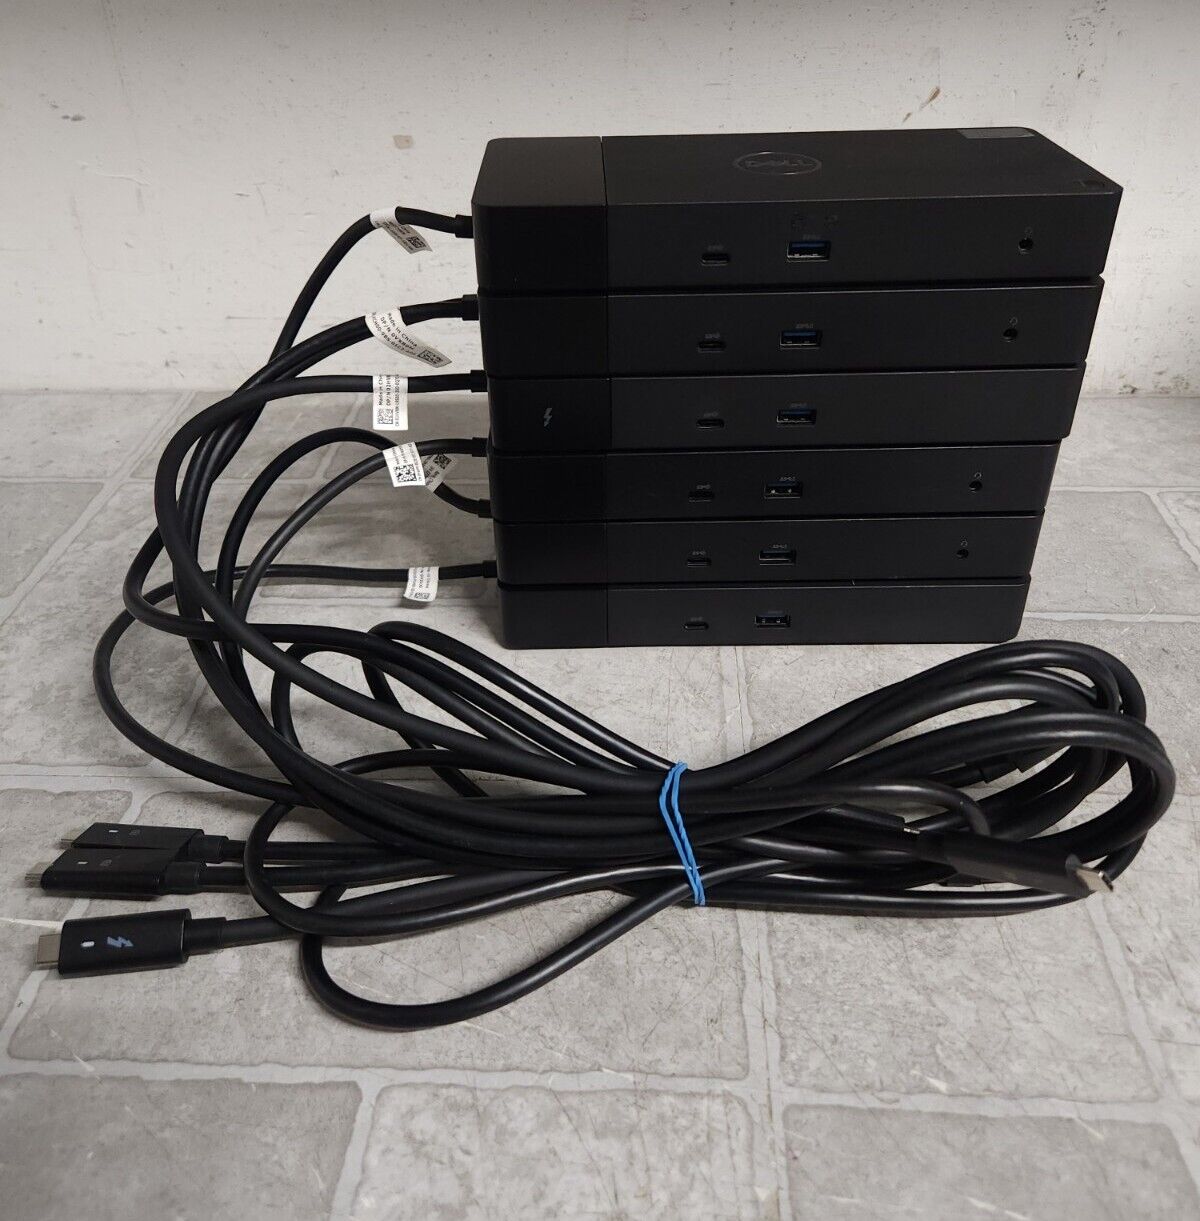 Lot of 6 Dell K20A WD19S/WD19DC/WD19TBS/WD19 Docking Stations NO POWER ADAPTERS